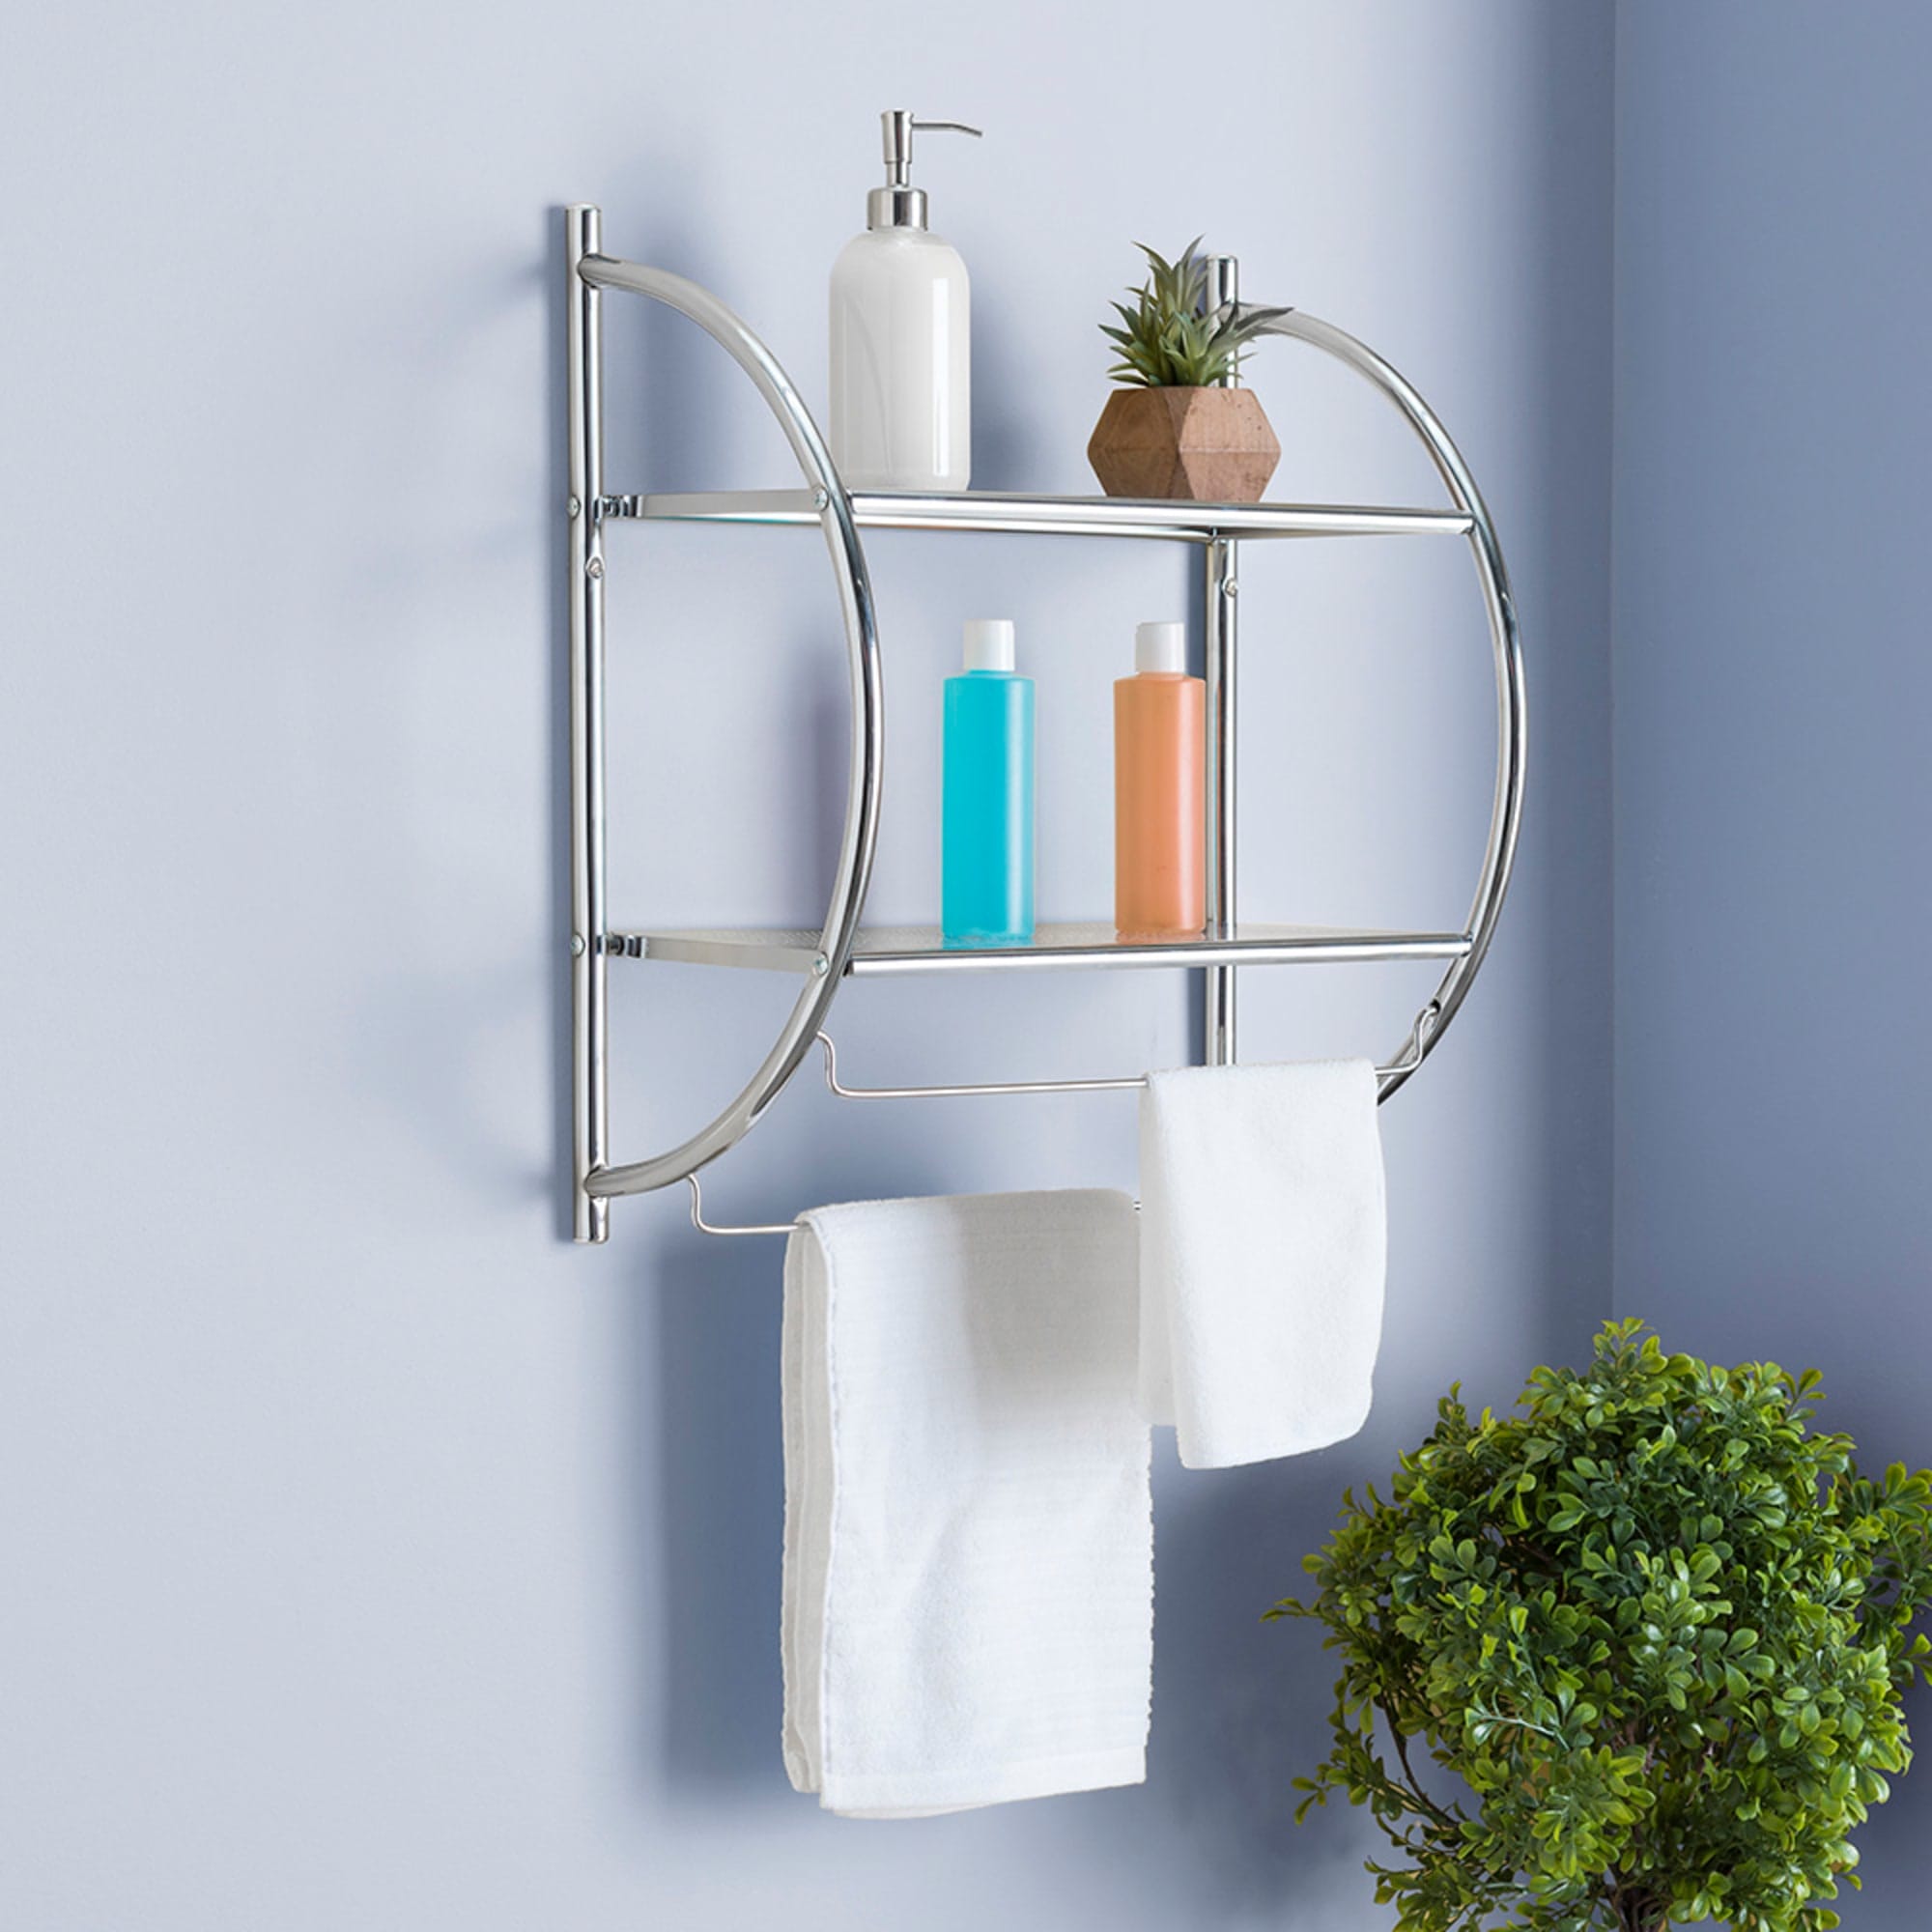 Home Basics Chrome Plated Steel Wall Mounted Paper Towel Holder with Basket, KITCHEN ORGANIZATION